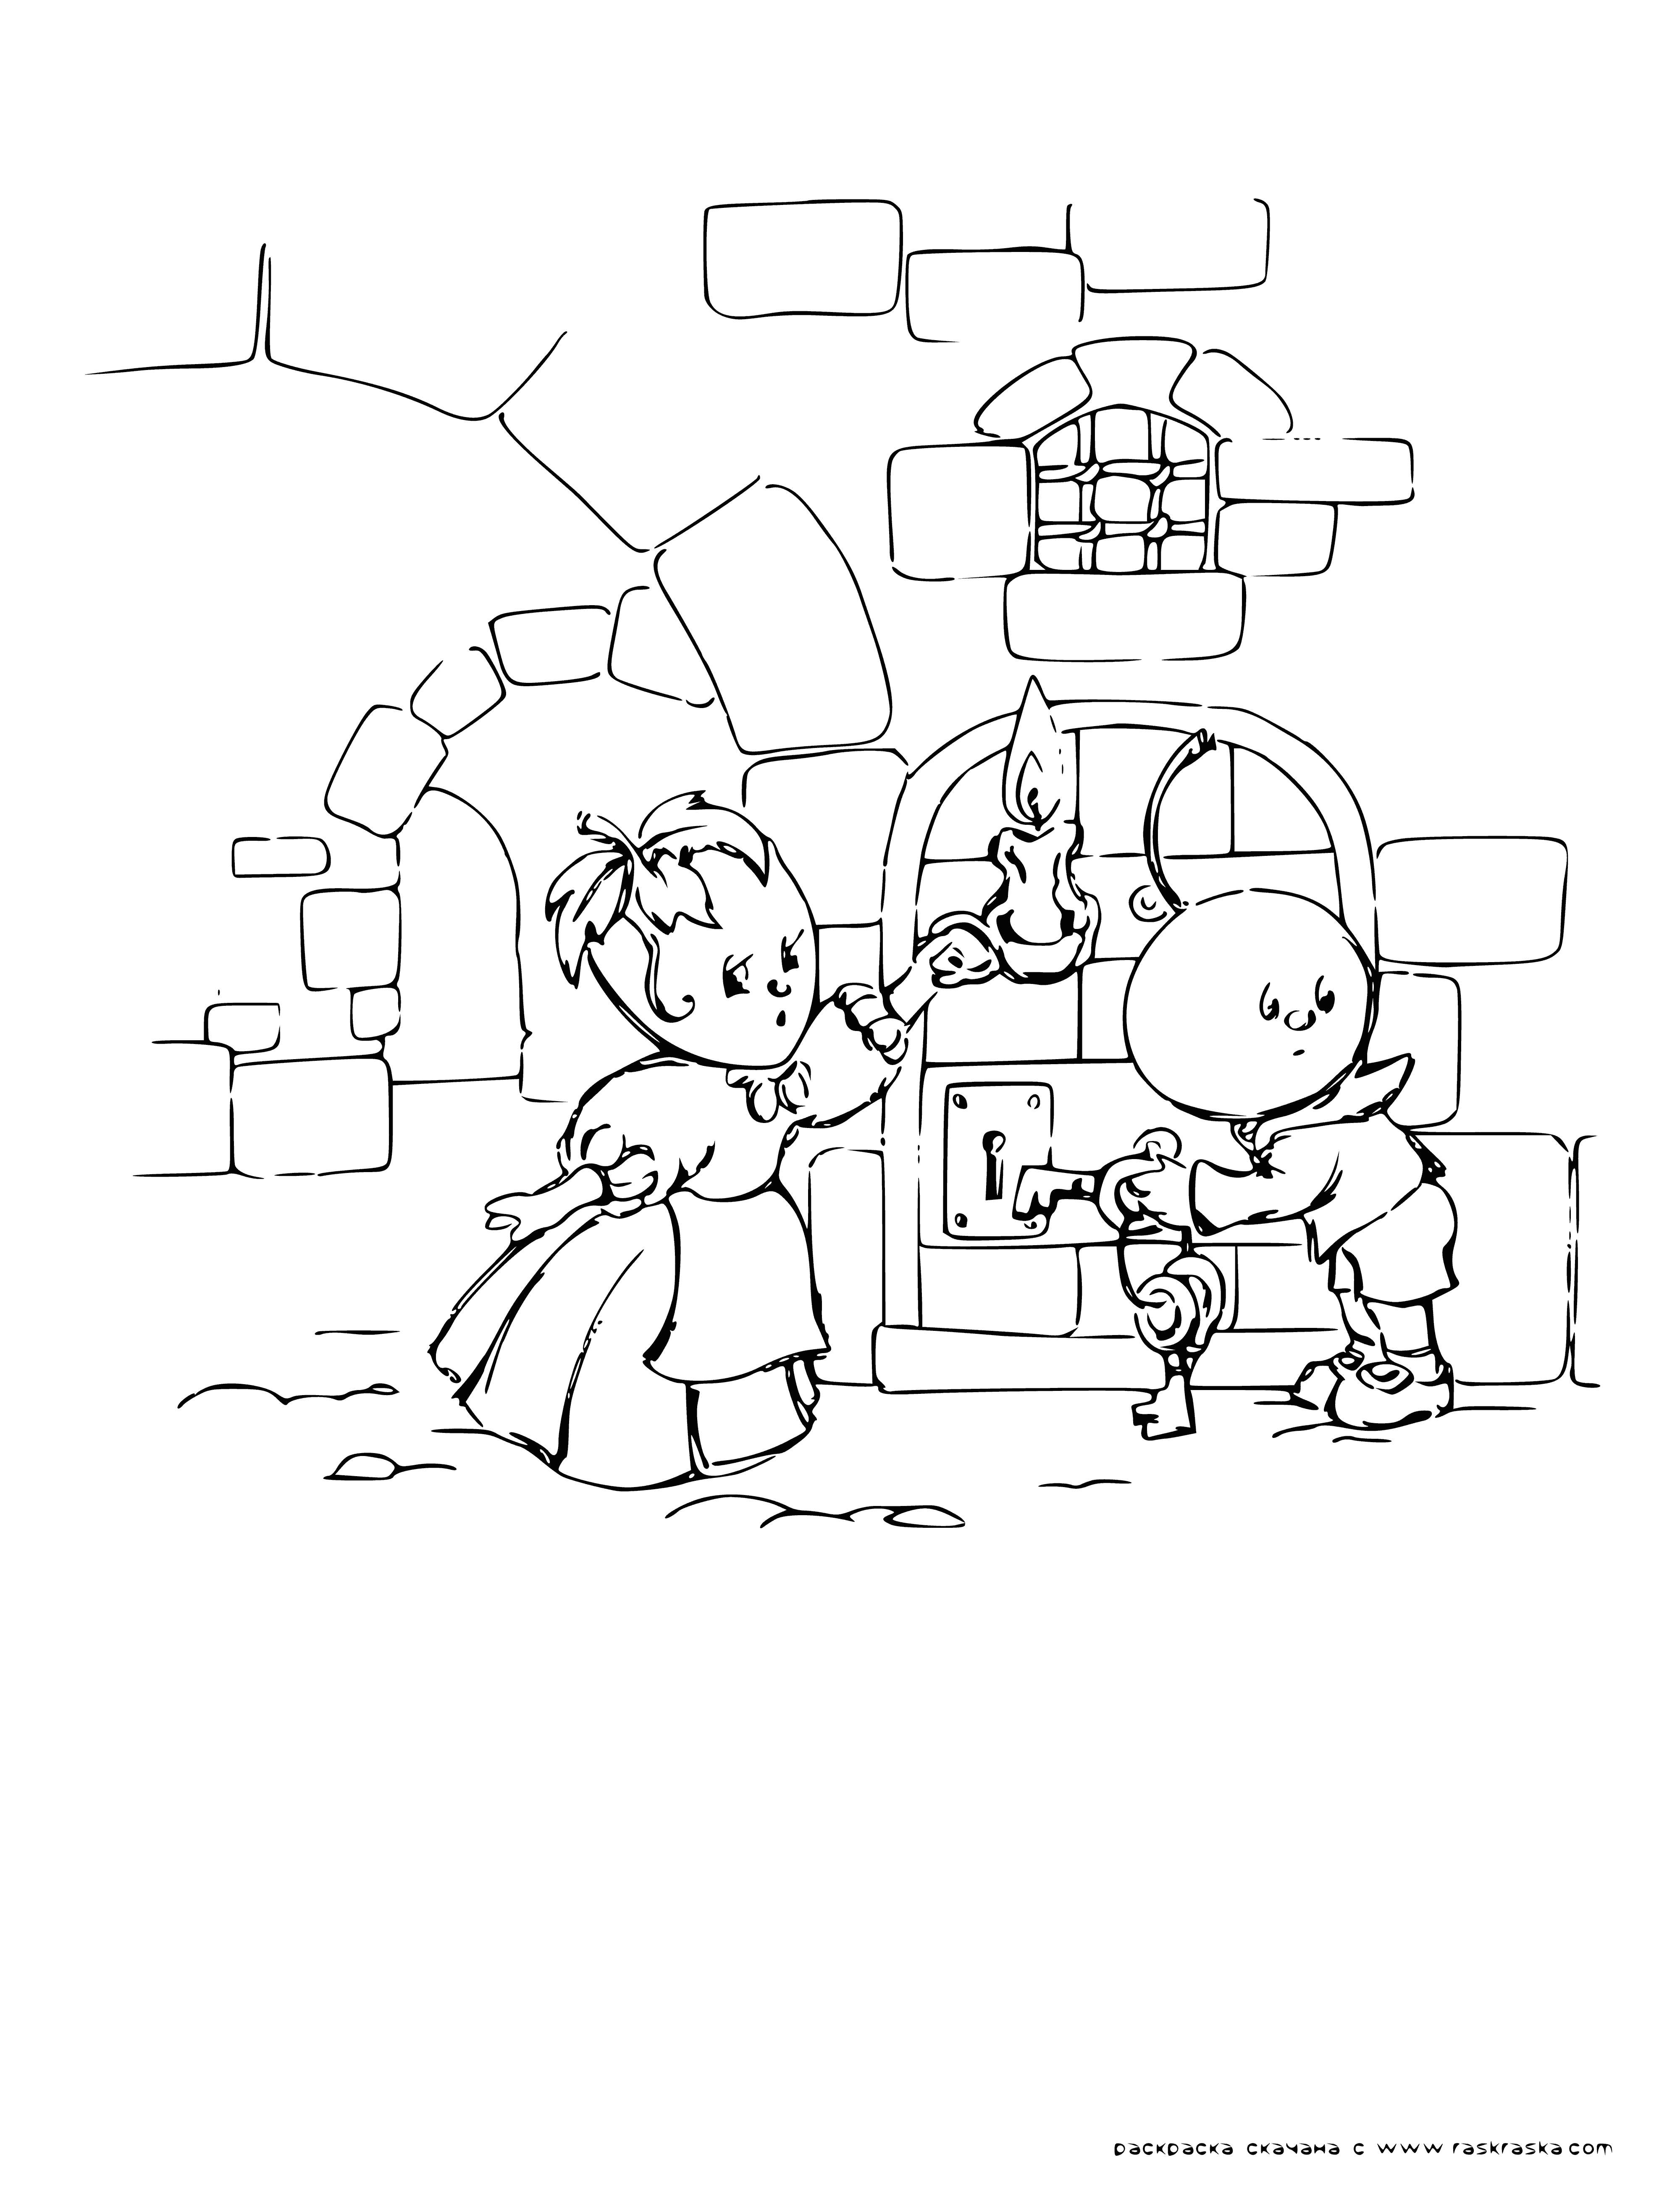 Cherry and strawberry coloring page